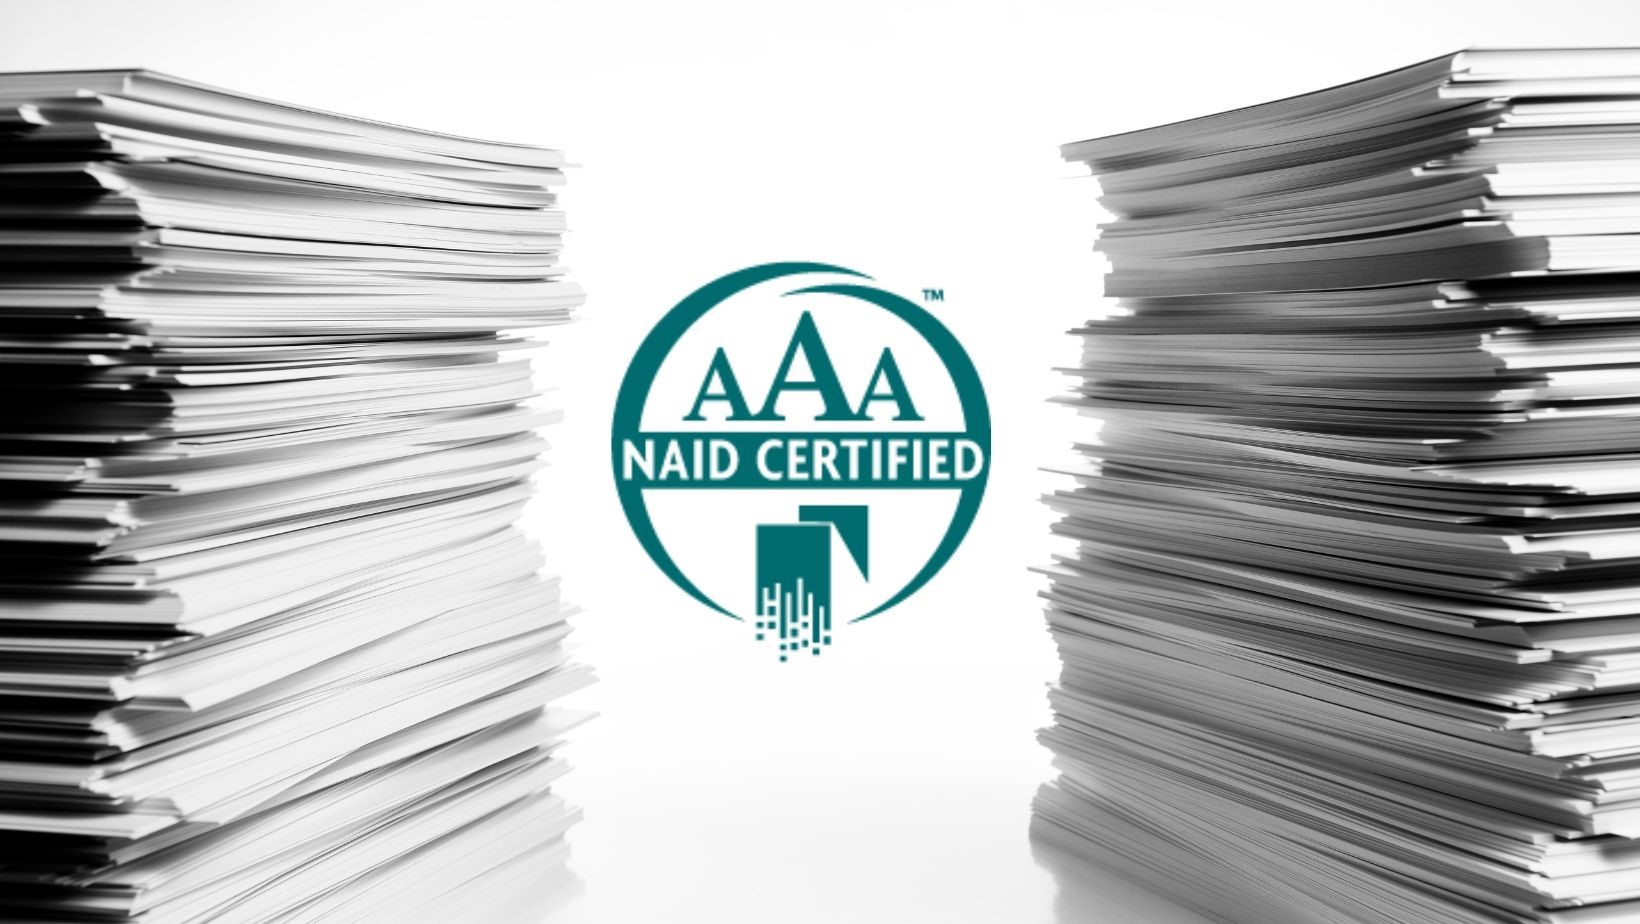 Why Use A Naid Aaa Certified Service